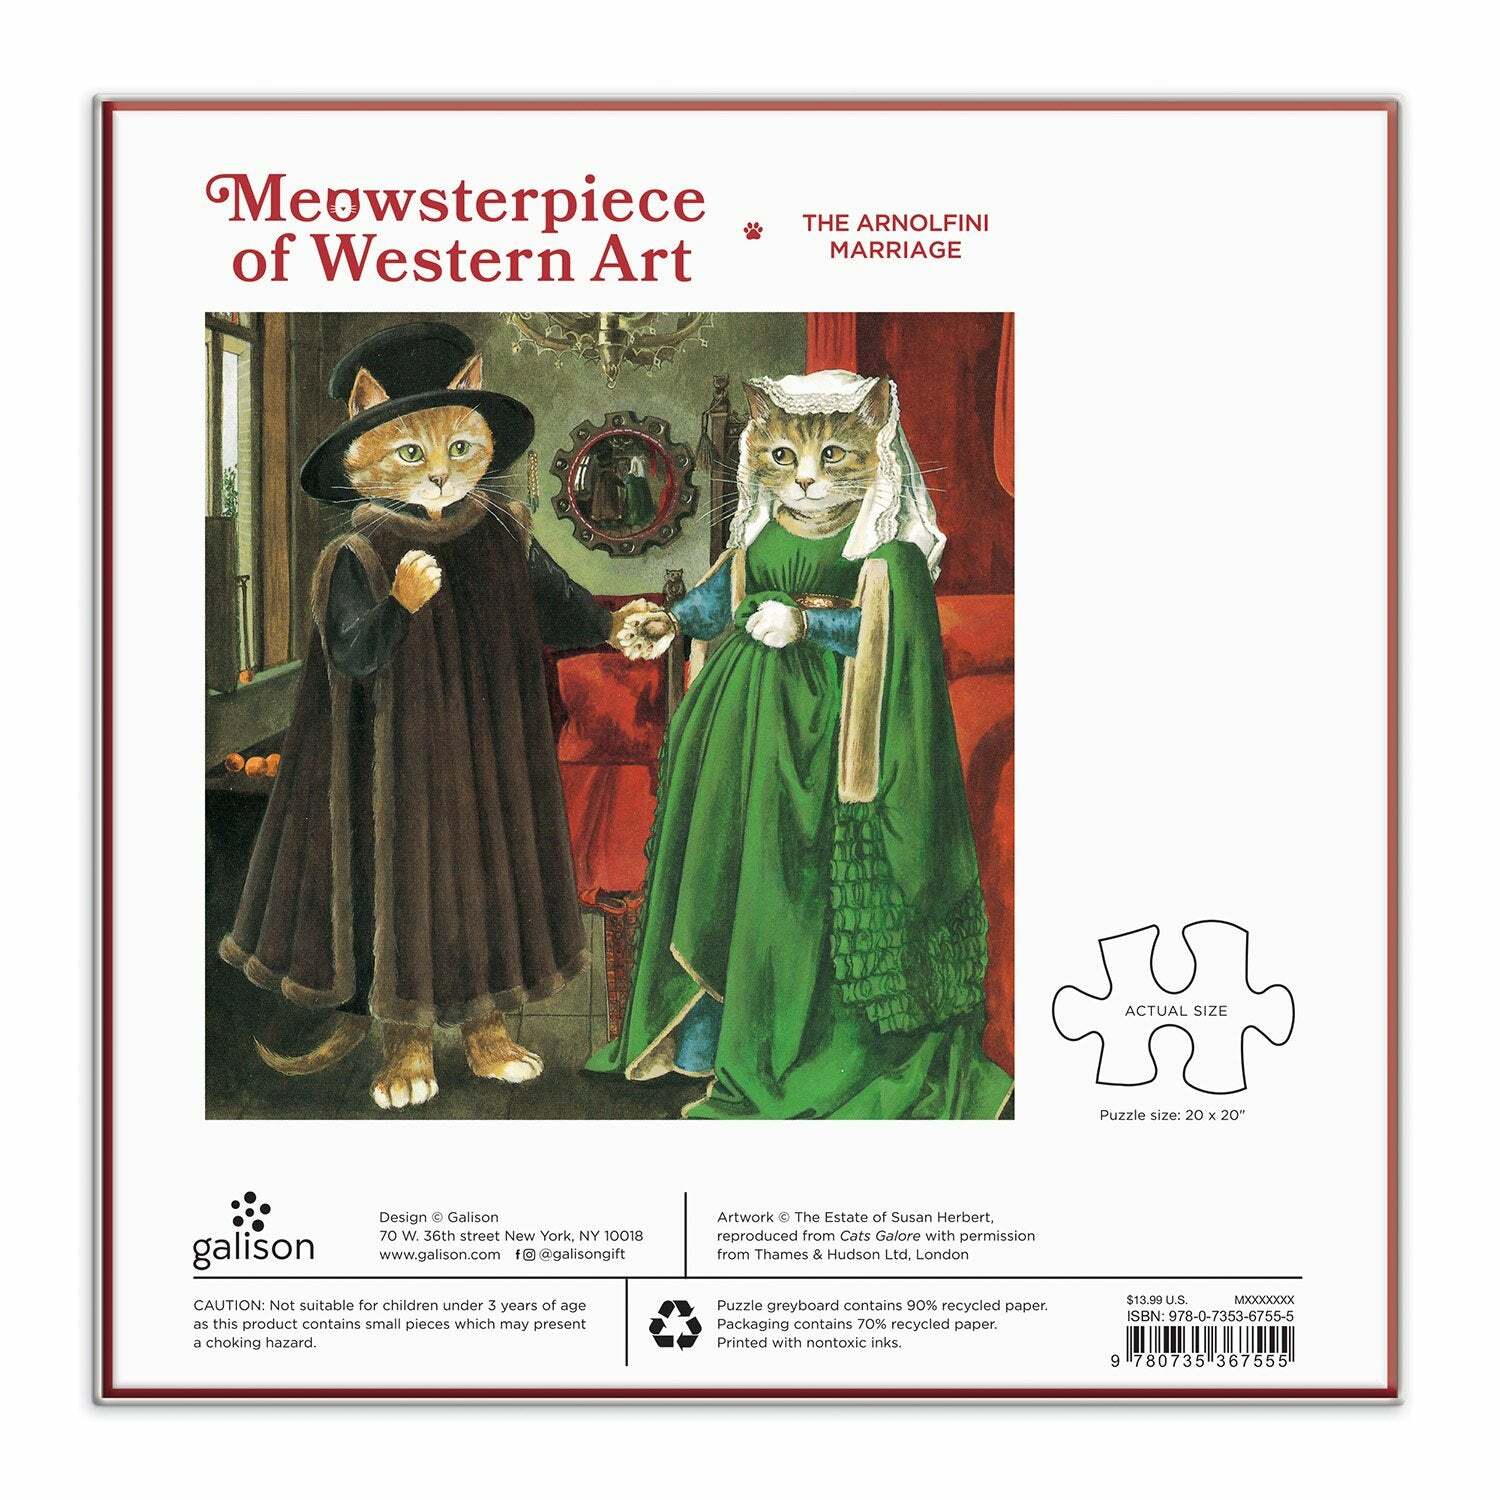 the-arnolfini-marriage-meowsterpiece-of-western-art-500-piece-puzzle-500-piece-puzzles-meowsterpiece-of-western-art-collection-745245_2400x